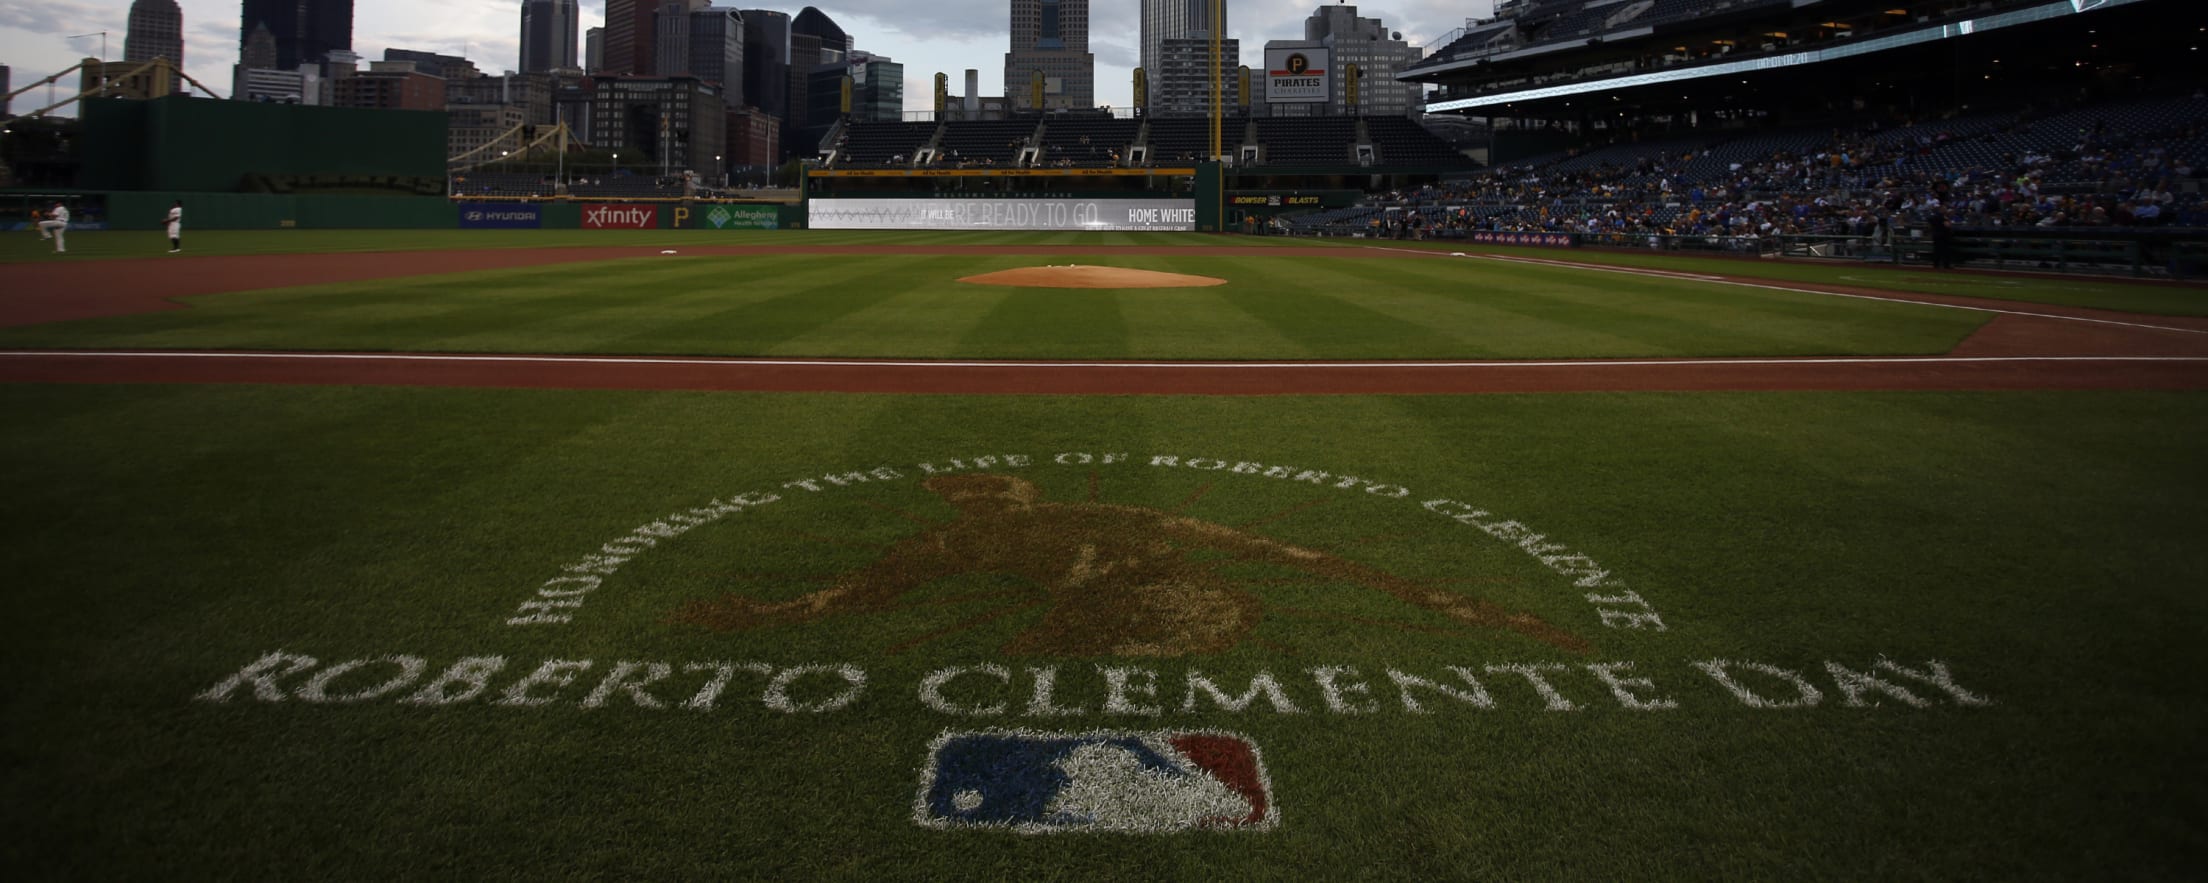 Roberto Clemente Day: Why is Roberto Clemente celebrated and who